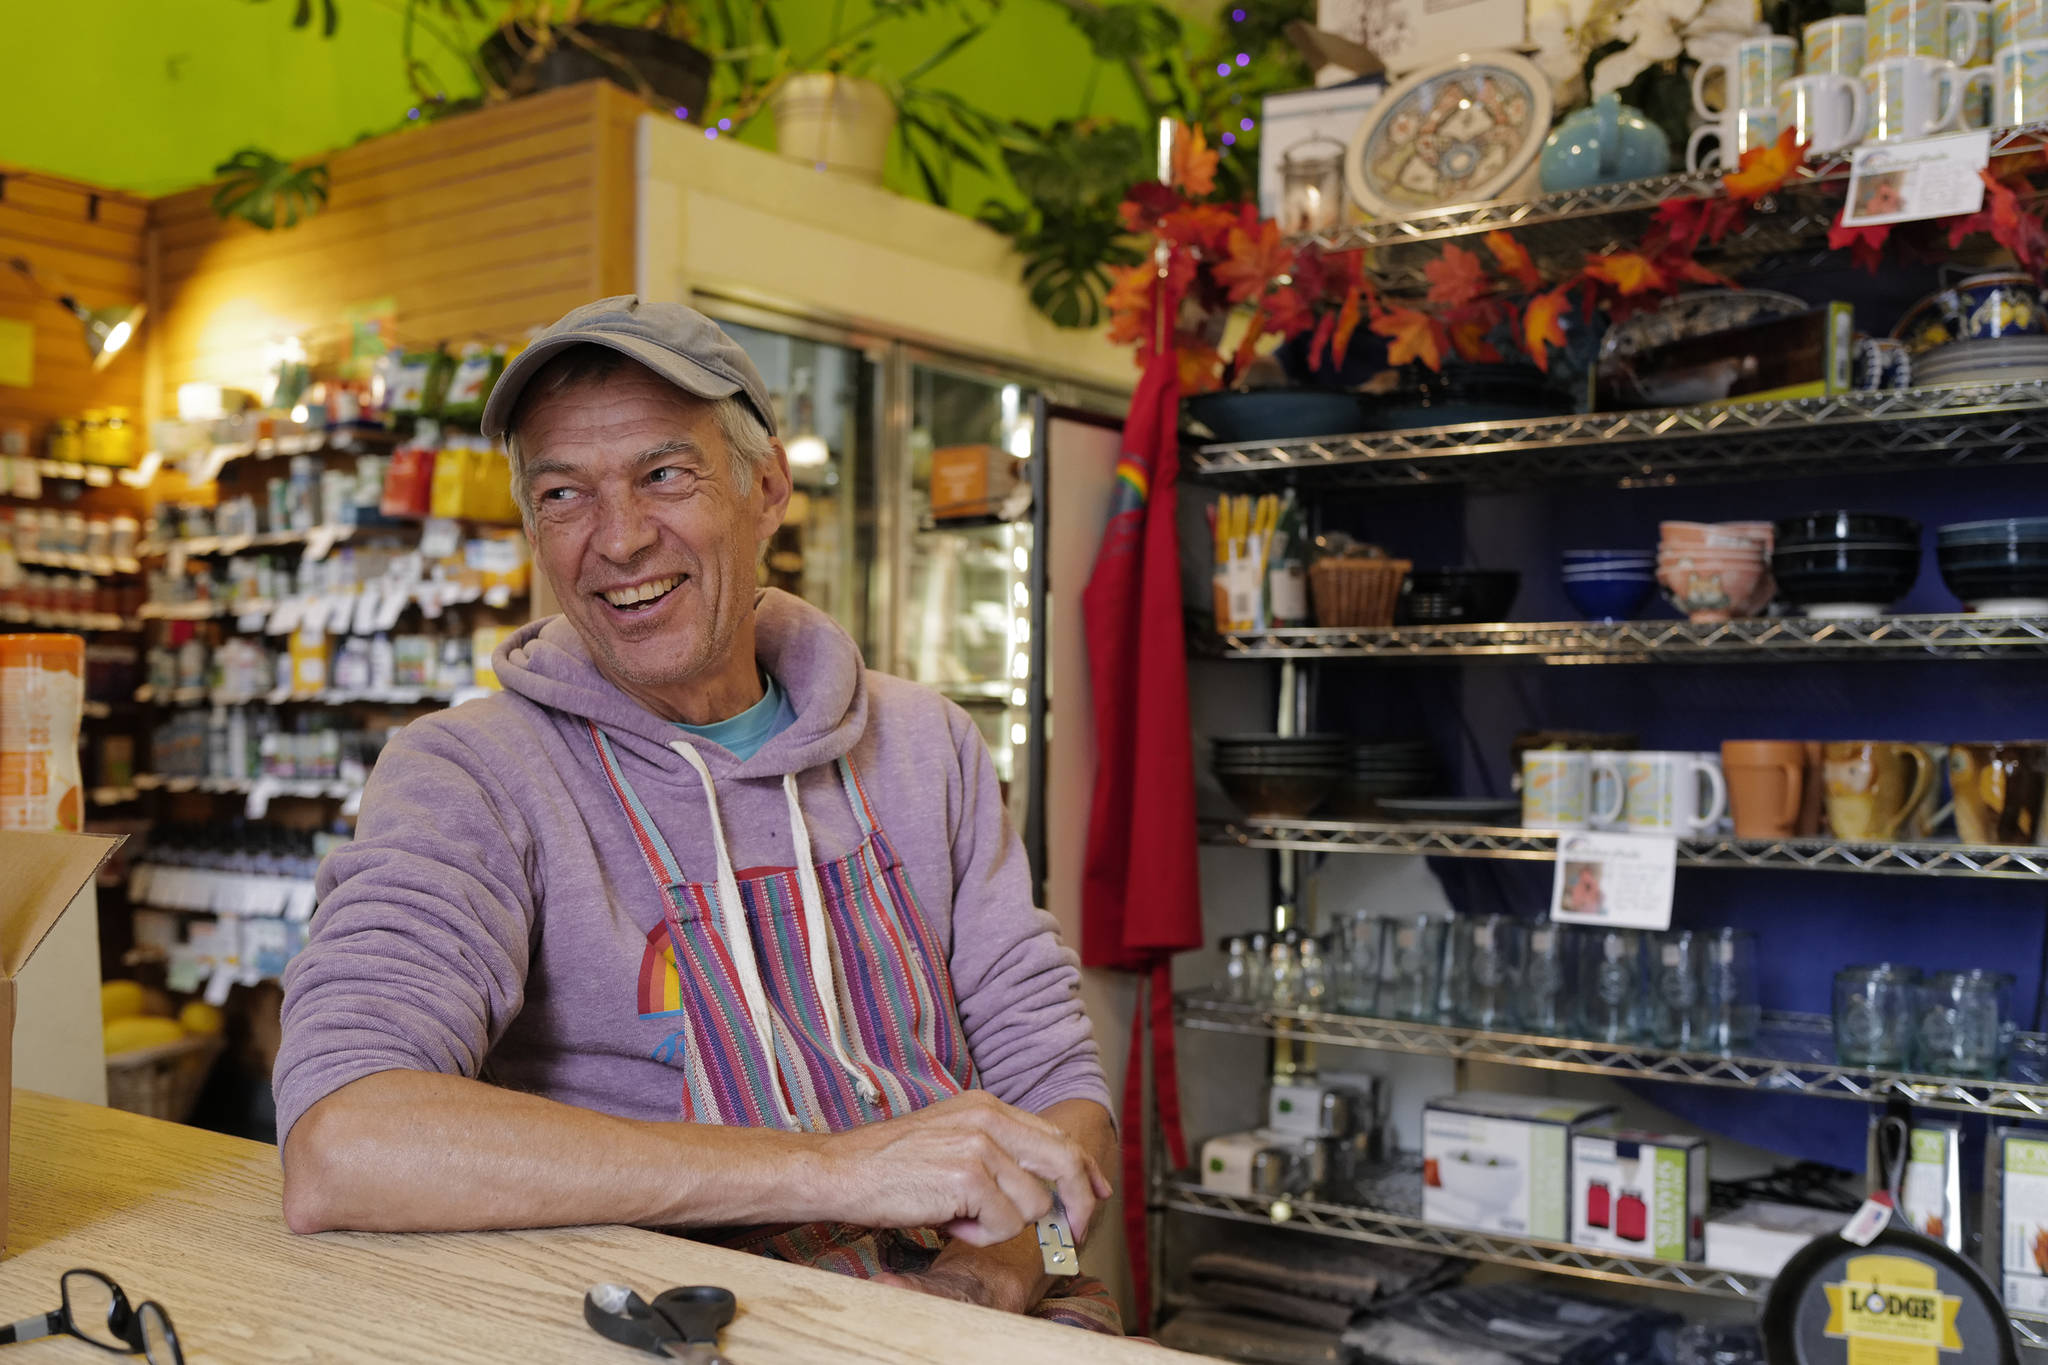 David Ottoson, owner of Rainbow Foods, talks about being named a 2019 Senior and Disability Advocate by Southeast Alaska Independent Living (SAIL) on Monday, Oct. 14, 2019. For about 20 years Rainbow Foods has been providing jobs for people with disabilities. (Michael Penn | Juneau Empire)